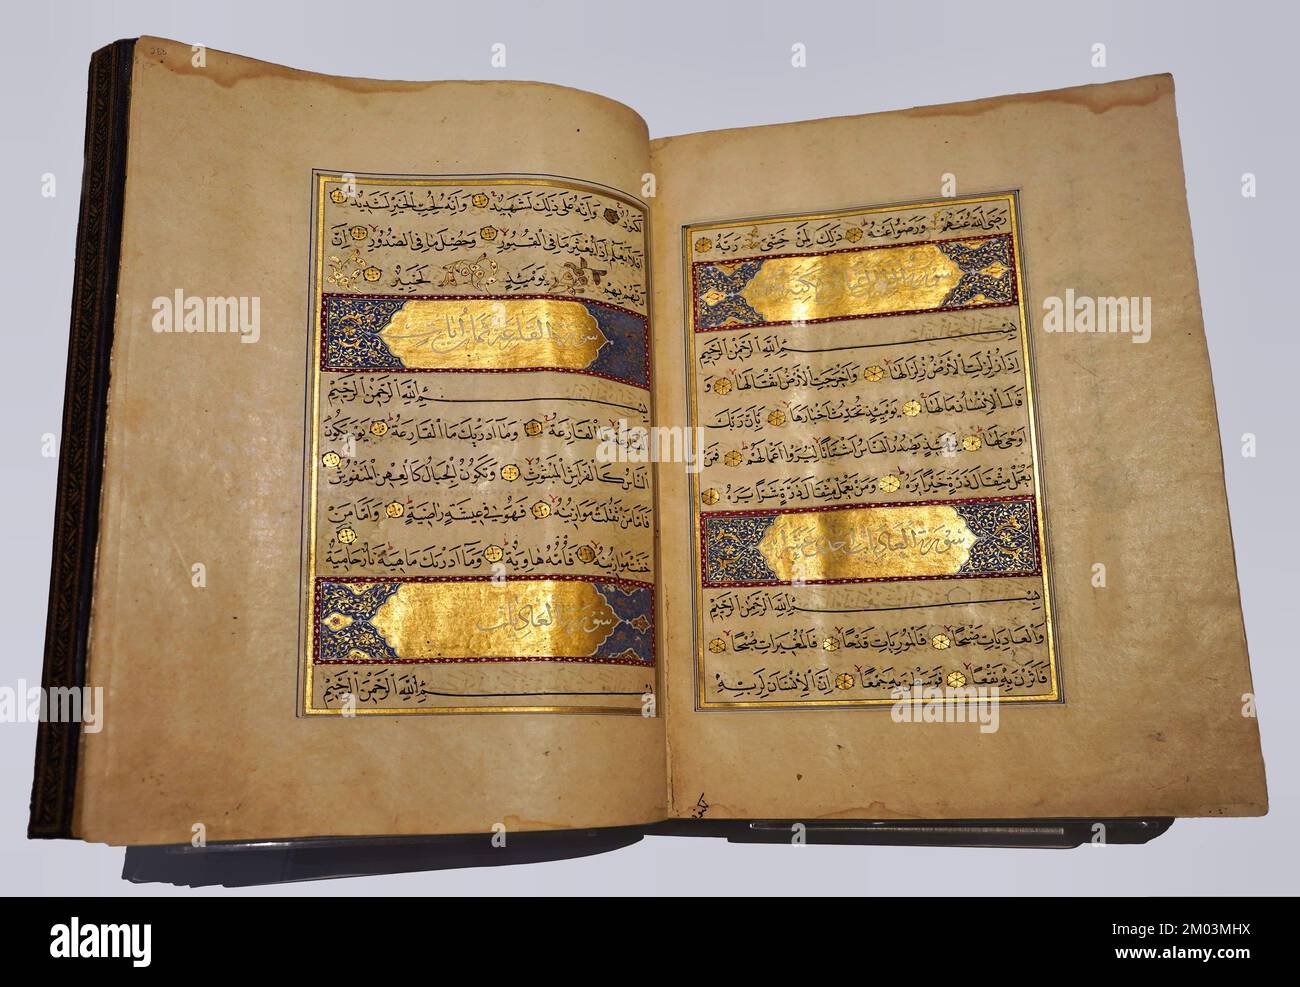 Toronto, Canada - December 2022:  Ancient illuminated manuscript of the Koran, the holy book of Islam, from Persia in the 1500s, in the collection of Stock Photo